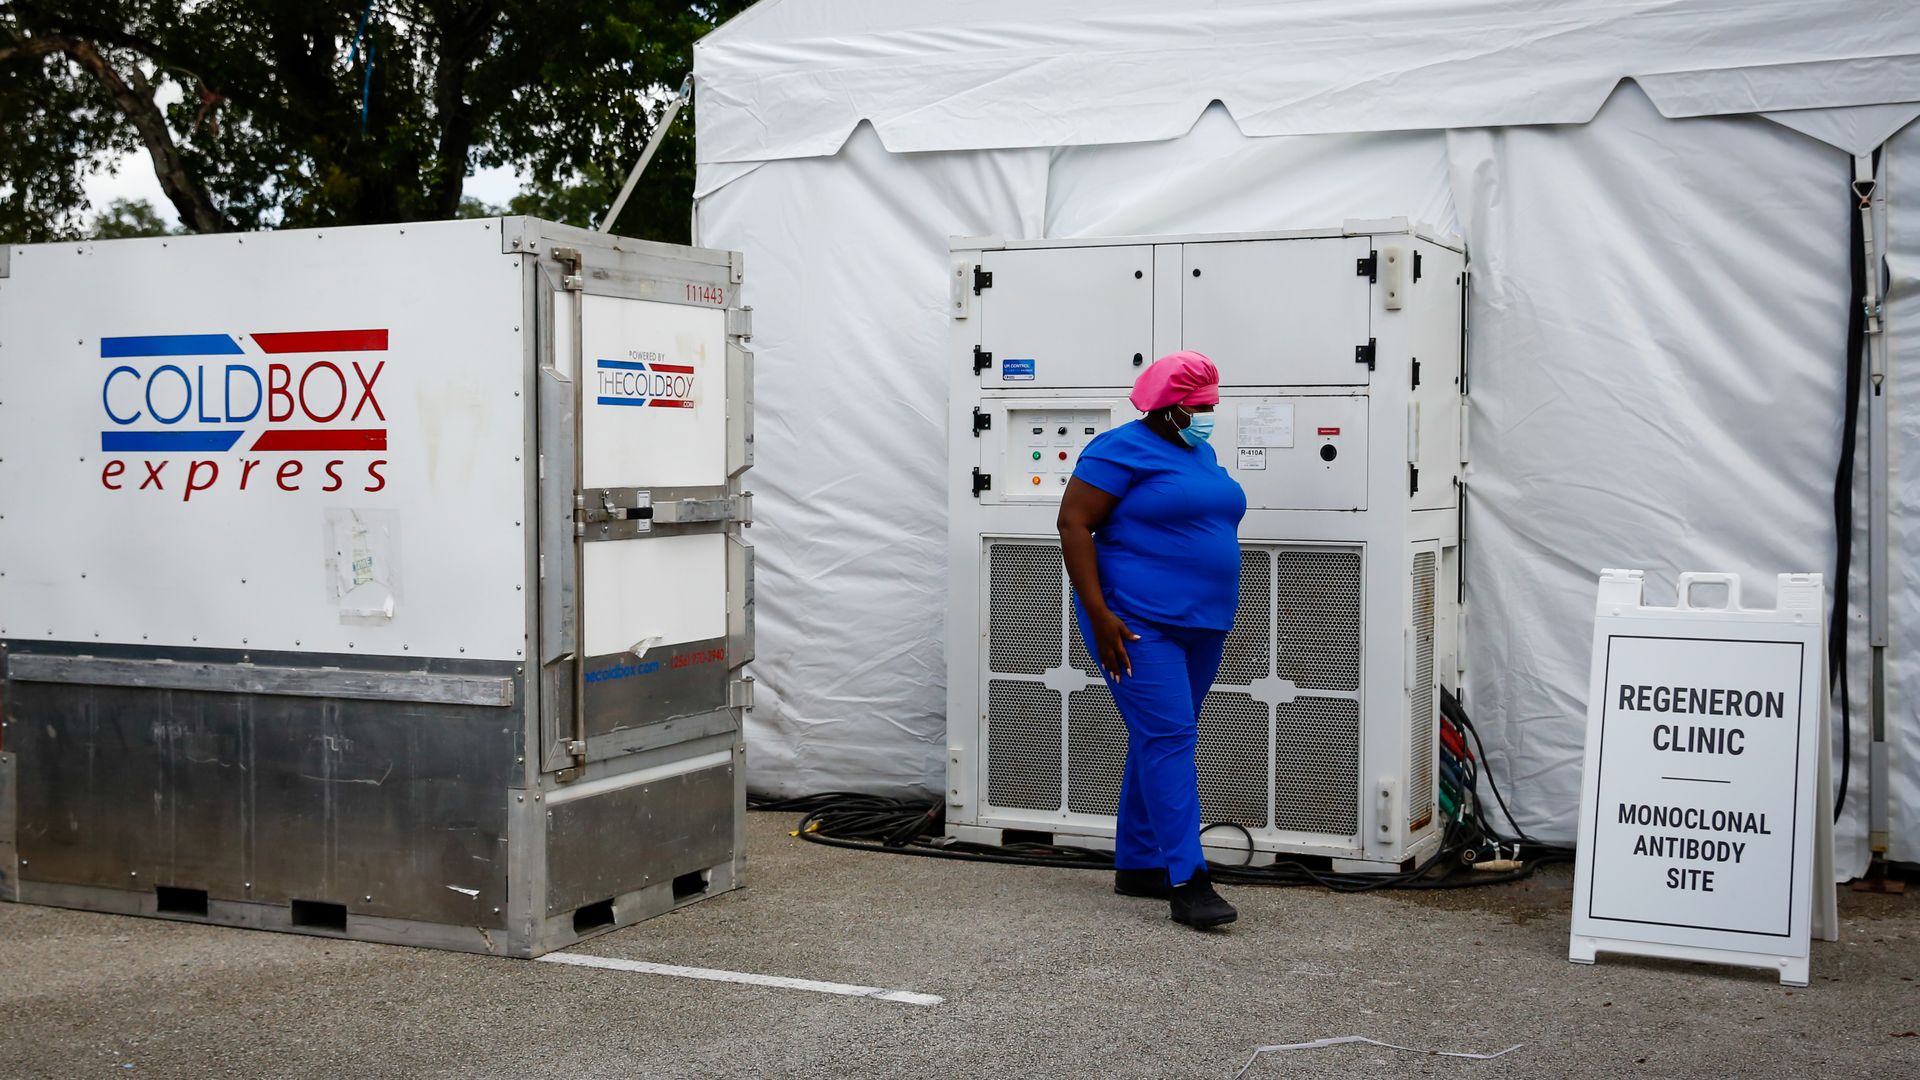 A coldbox containing monoclonal antibody treatments at a Regeneron clinic in Pembroke Pines, Florida, U.S., on Wednesday, Aug. 18.